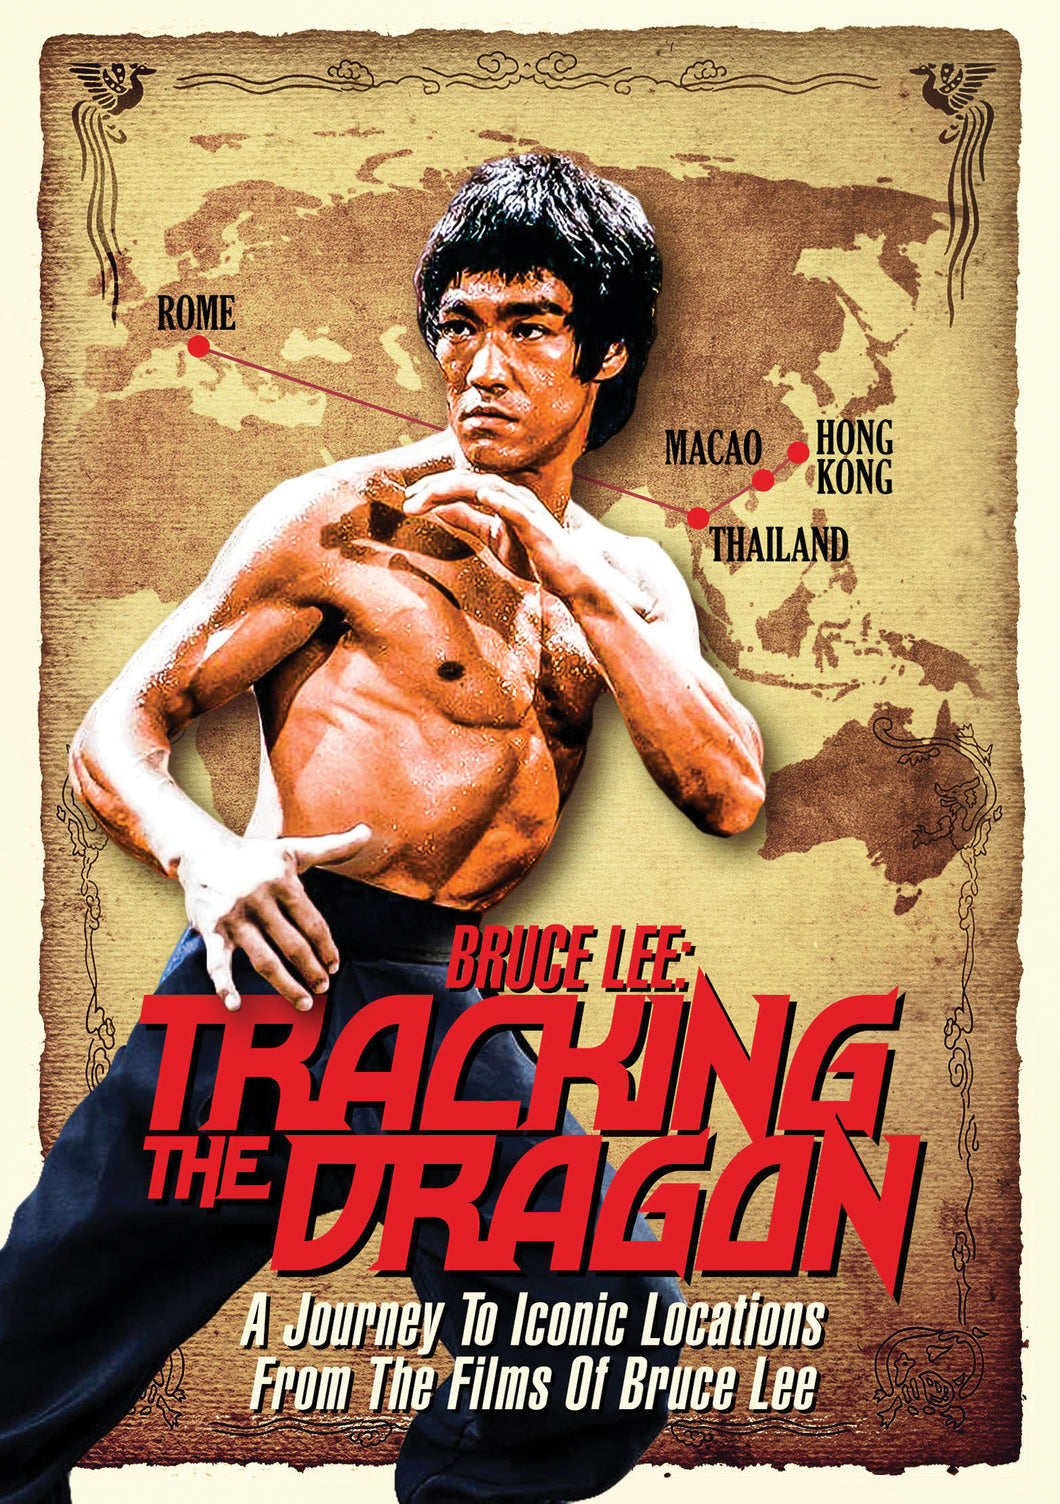 Bruce Lee: Tracking The Dragon (DVD)